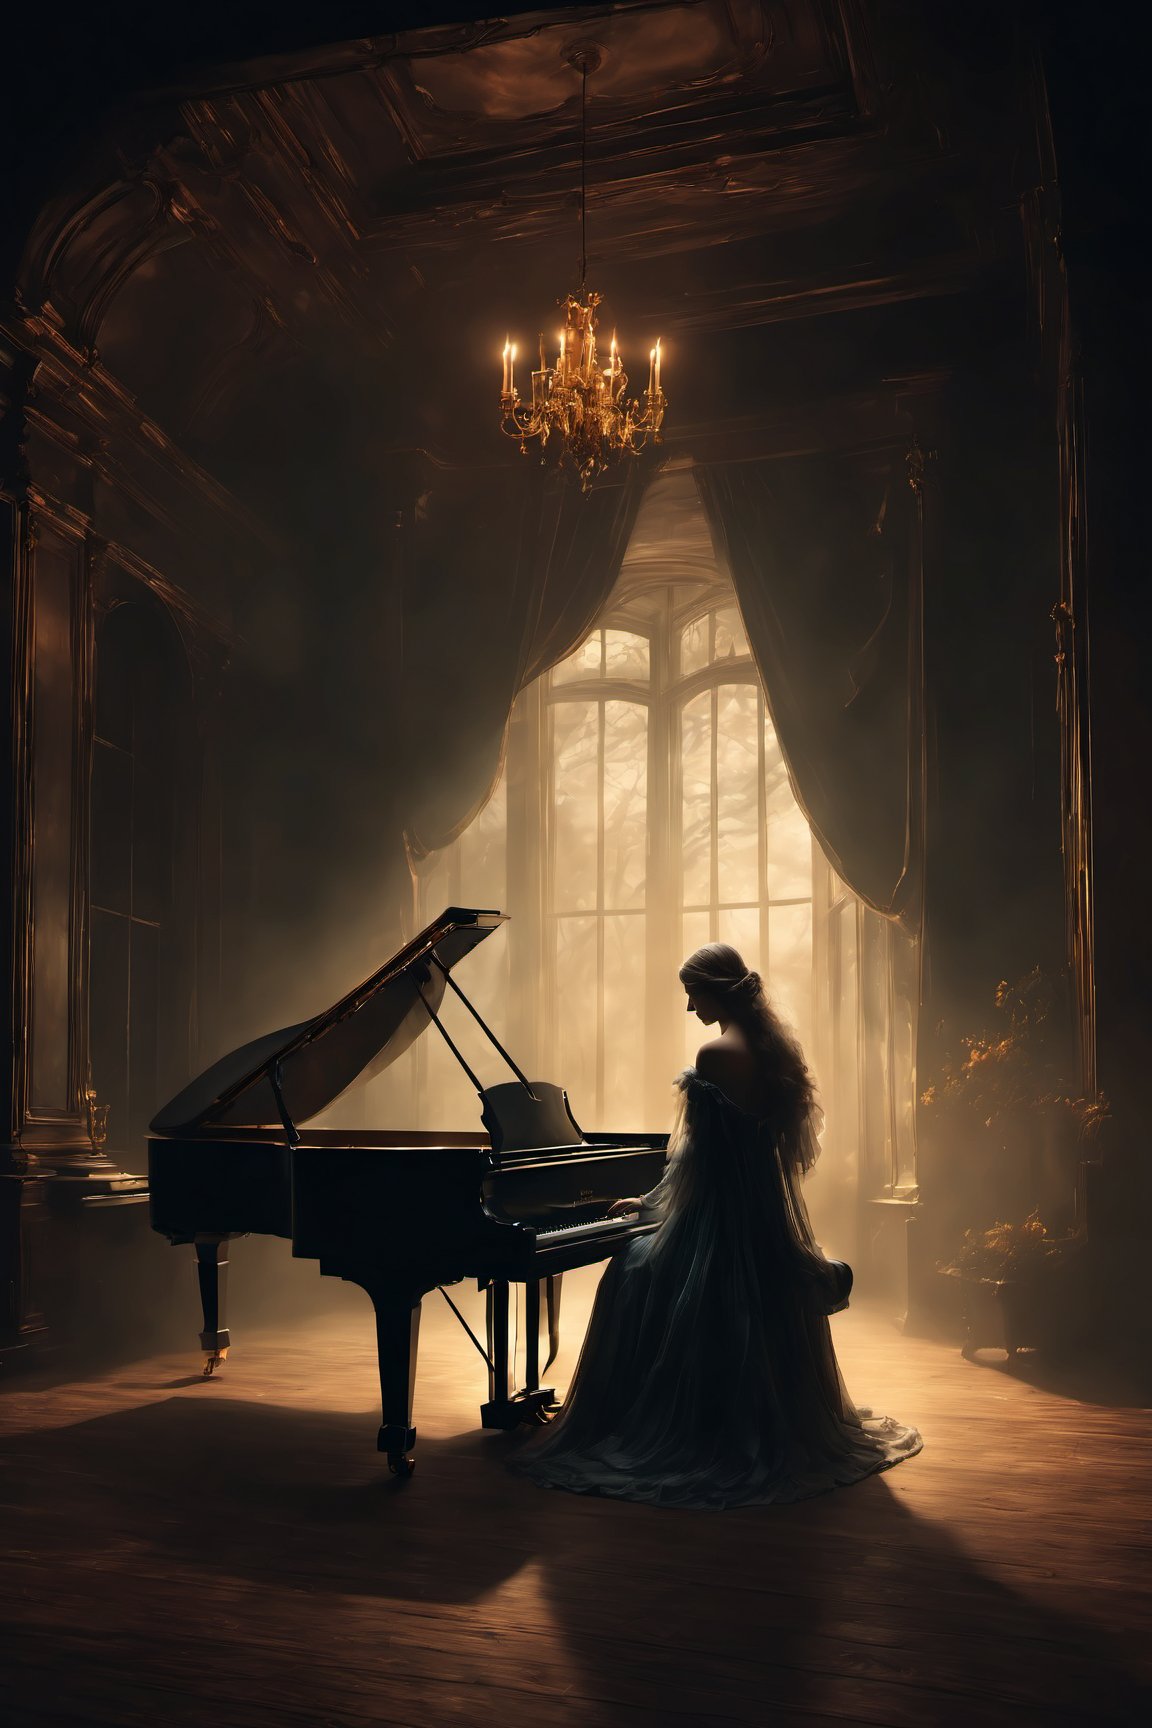 a haunting and ethereal digital painting of a ghostly figure playing a melancholic melody on a grand piano, surrounded by an enchanted audience entranced by the music, oblivious to the dark and eerie surroundings. The ghostly figure is partially transparent, emitting a soft glow, with flowing ethereal robes. The grand piano is intricately detailed, with delicate looks and a weathered appearance. The composition is dynamic and atmospheric, with muted colors and dramatic lighting, evoking a sense of mystery and foreboding. Inspired by the works of classical painters like Caspar David Friedrich, this artwork captures the captivating and haunting nature of the scene. Created using digital painting techniques and rendered with realistic textures and lighting effects for a stunning and immersive visual experience.